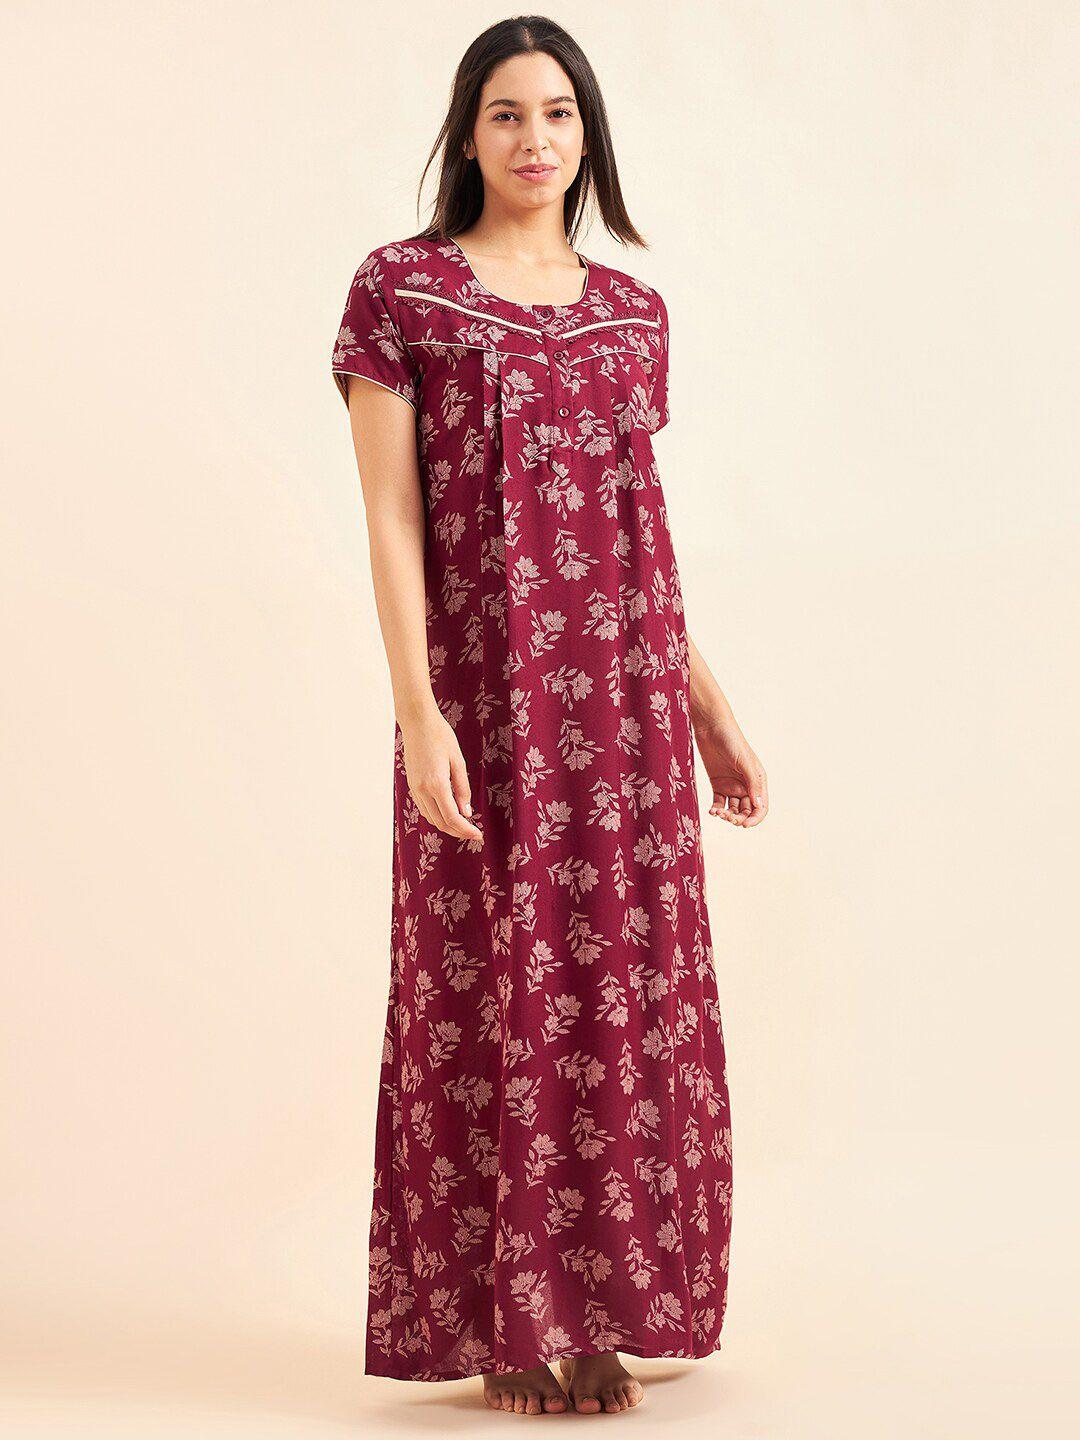 sweet-dreams-maroon-&-white-floral-printed-maxi-pure-cotton-nightdress